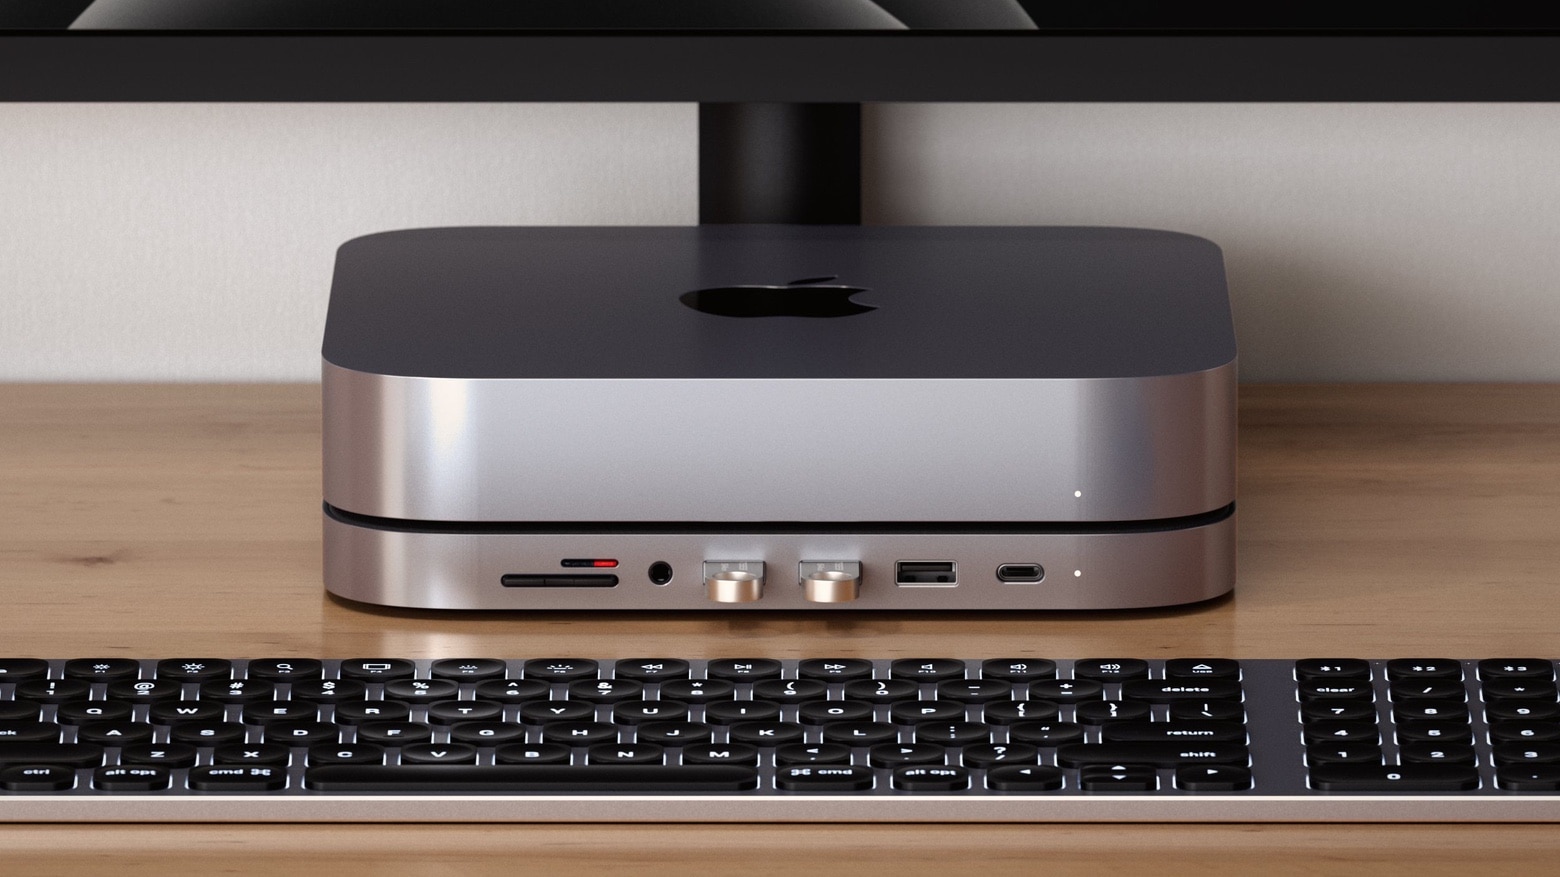 The Satechi Stand & Hub puts the Mac Mini ports front and center.